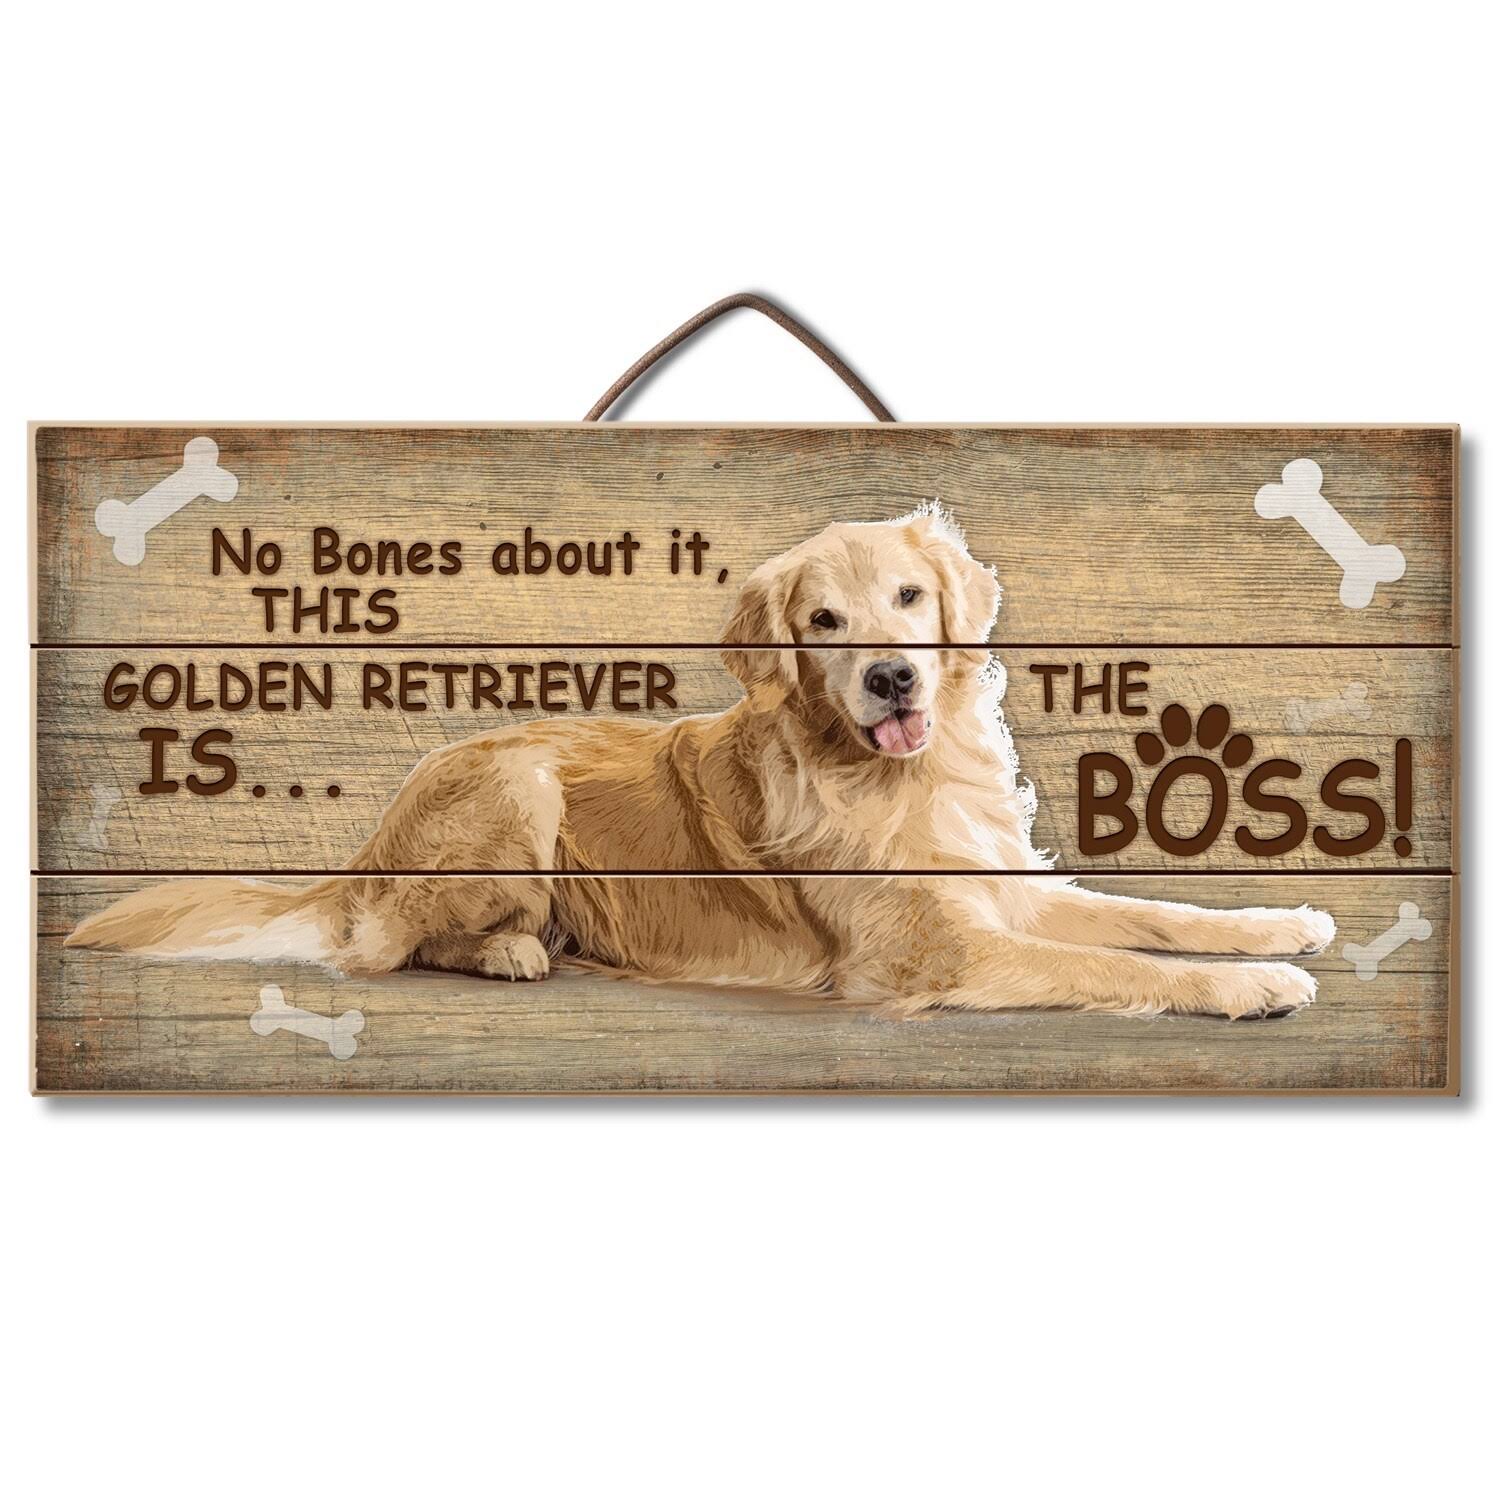 Golden Retriever is The Boss Reclaimed Pallet Wood Sign - Made in Usa!